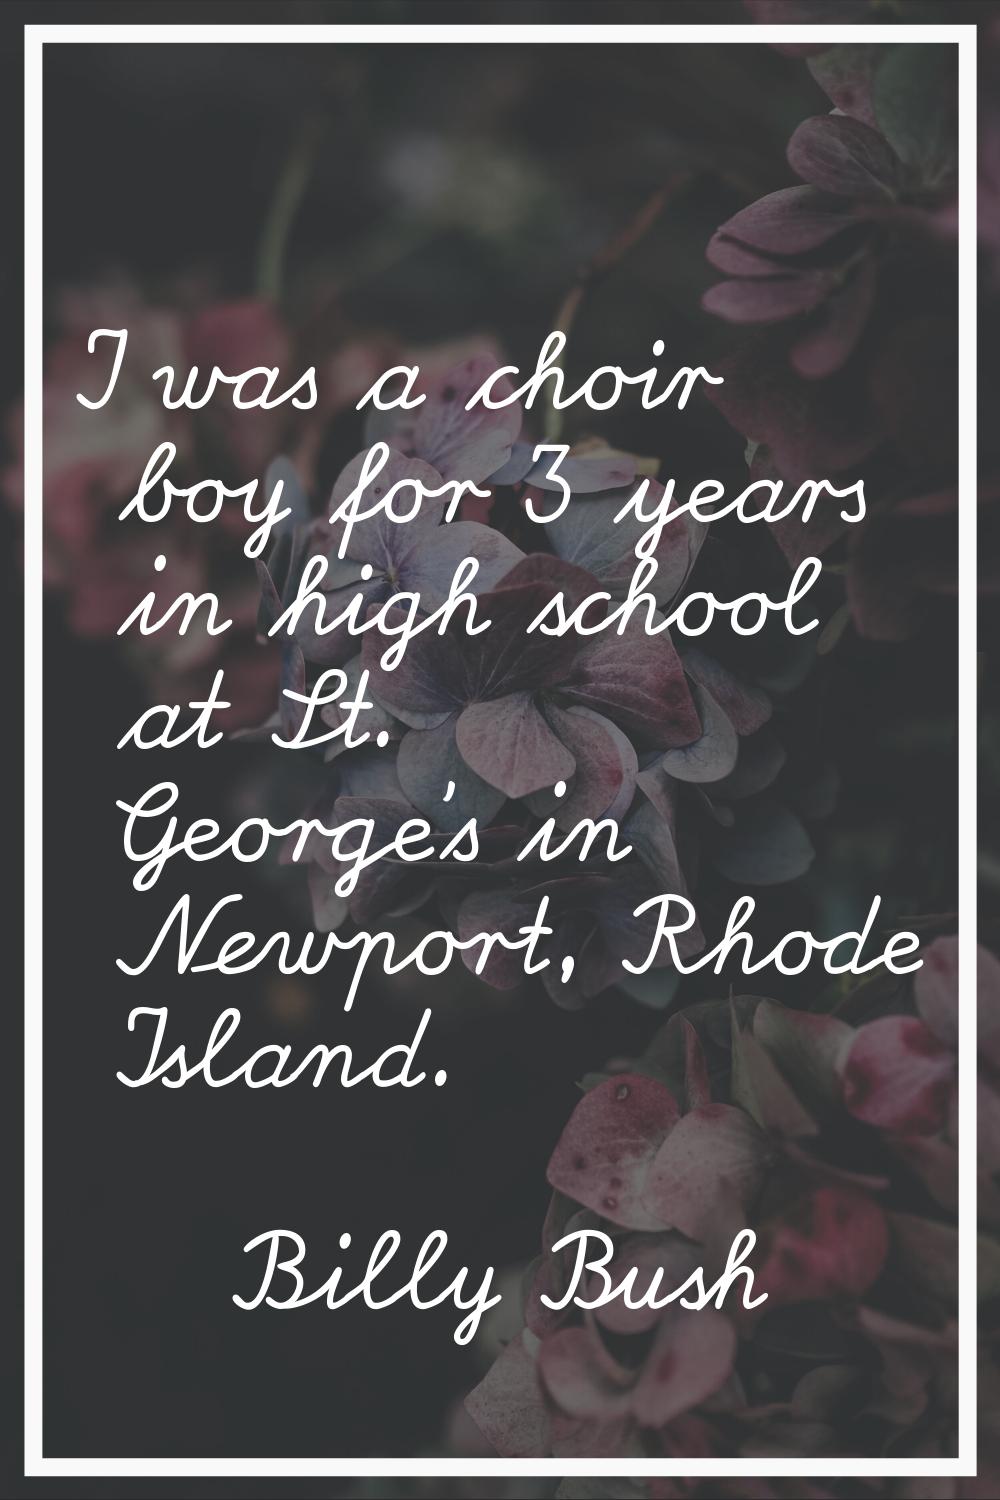 I was a choir boy for 3 years in high school at St. George's in Newport, Rhode Island.